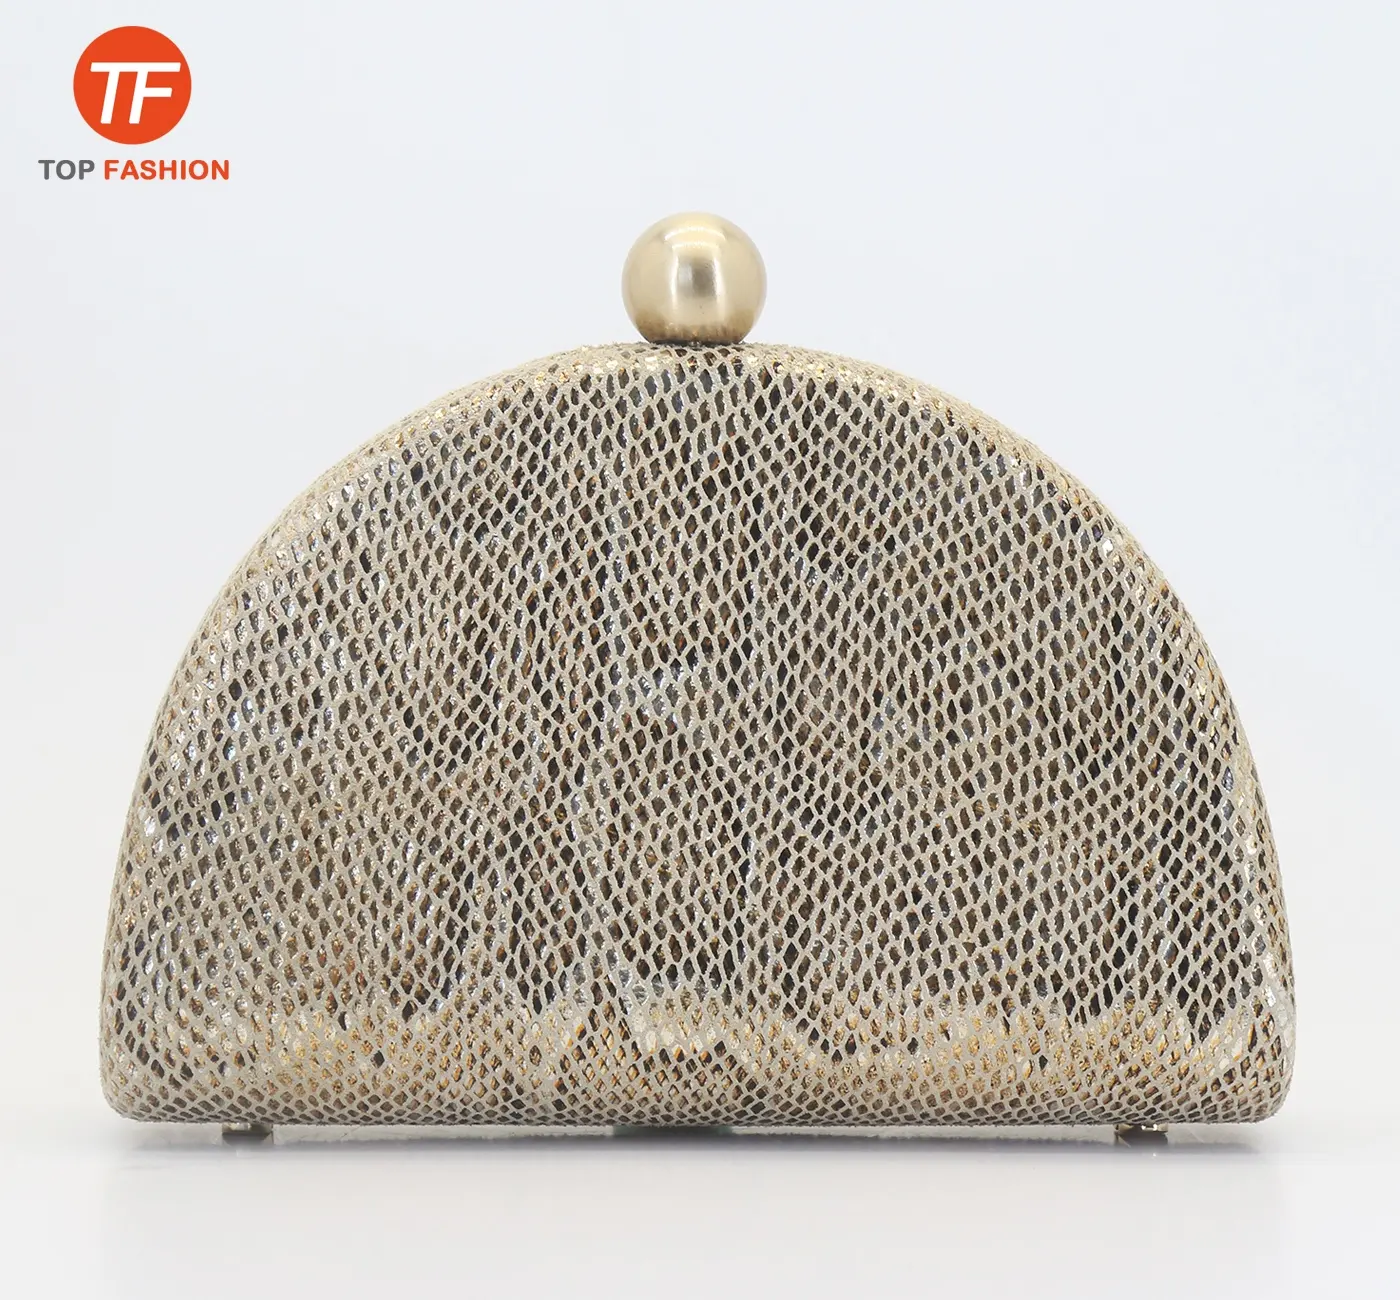 Gold Python Clutch Purse Women Evening Bag High Quality Wholesales from China Supplier